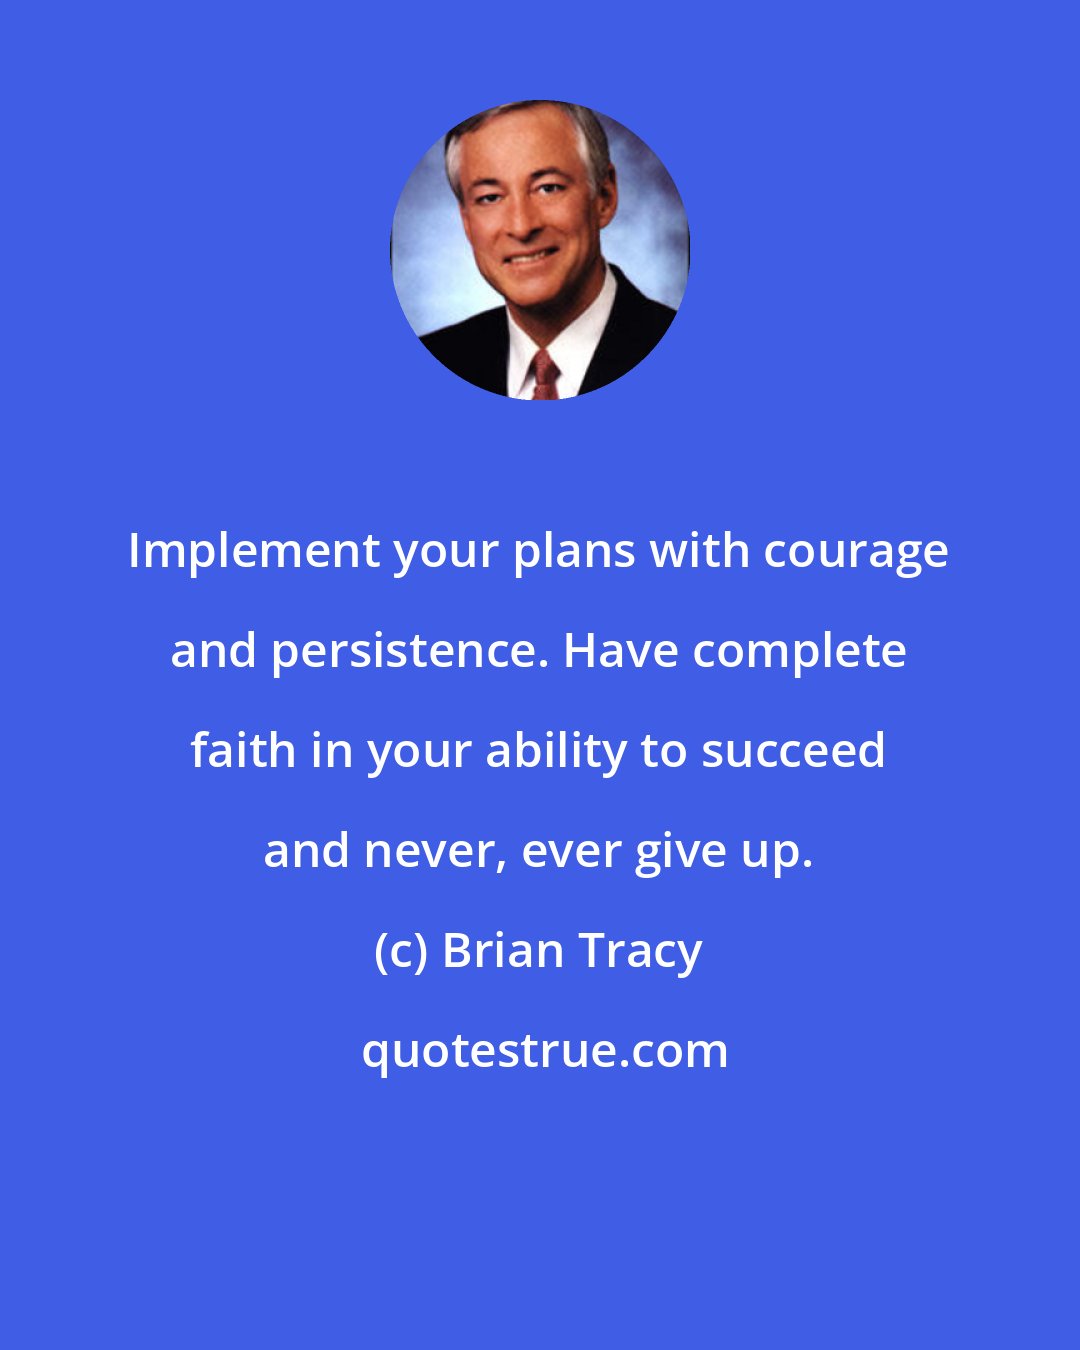 Brian Tracy: Implement your plans with courage and persistence. Have complete faith in your ability to succeed and never, ever give up.